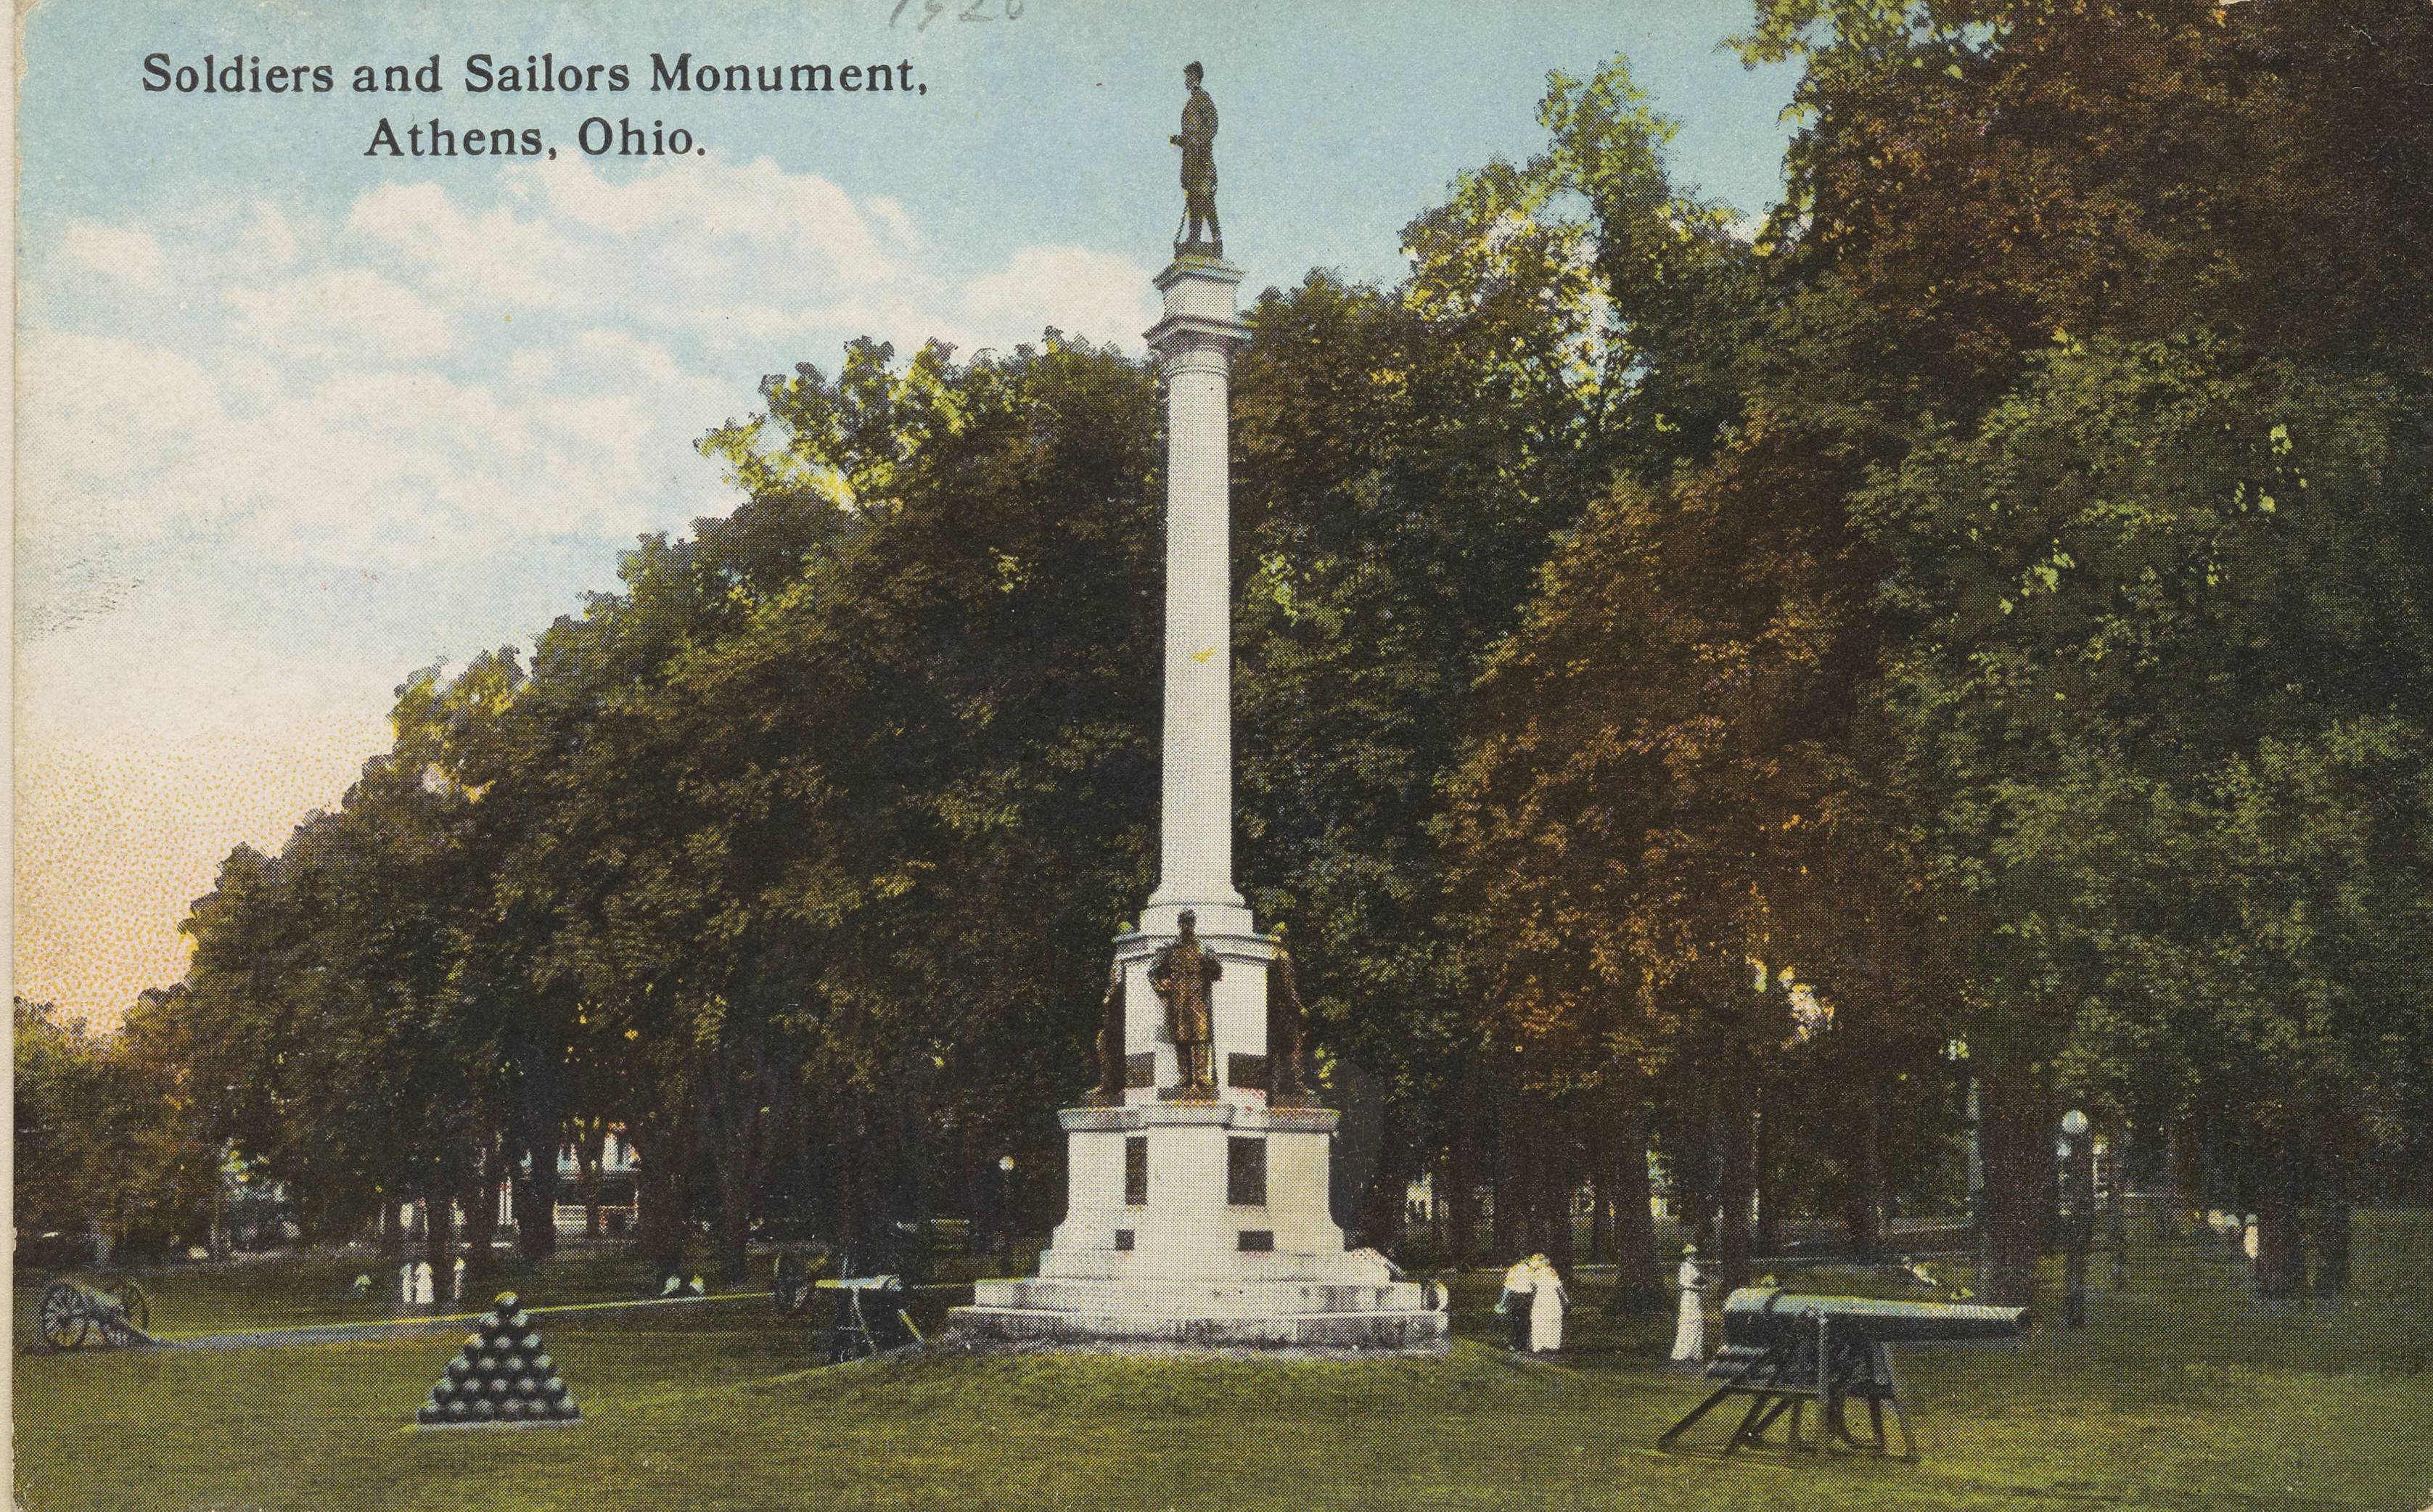 The monument is depicted in this photographic postcard from the 19-teens. The postcard was included in the documentary scrapbook collection of William E. Peters. Photo courtesy the Mahn Center for Archives & Special Collections